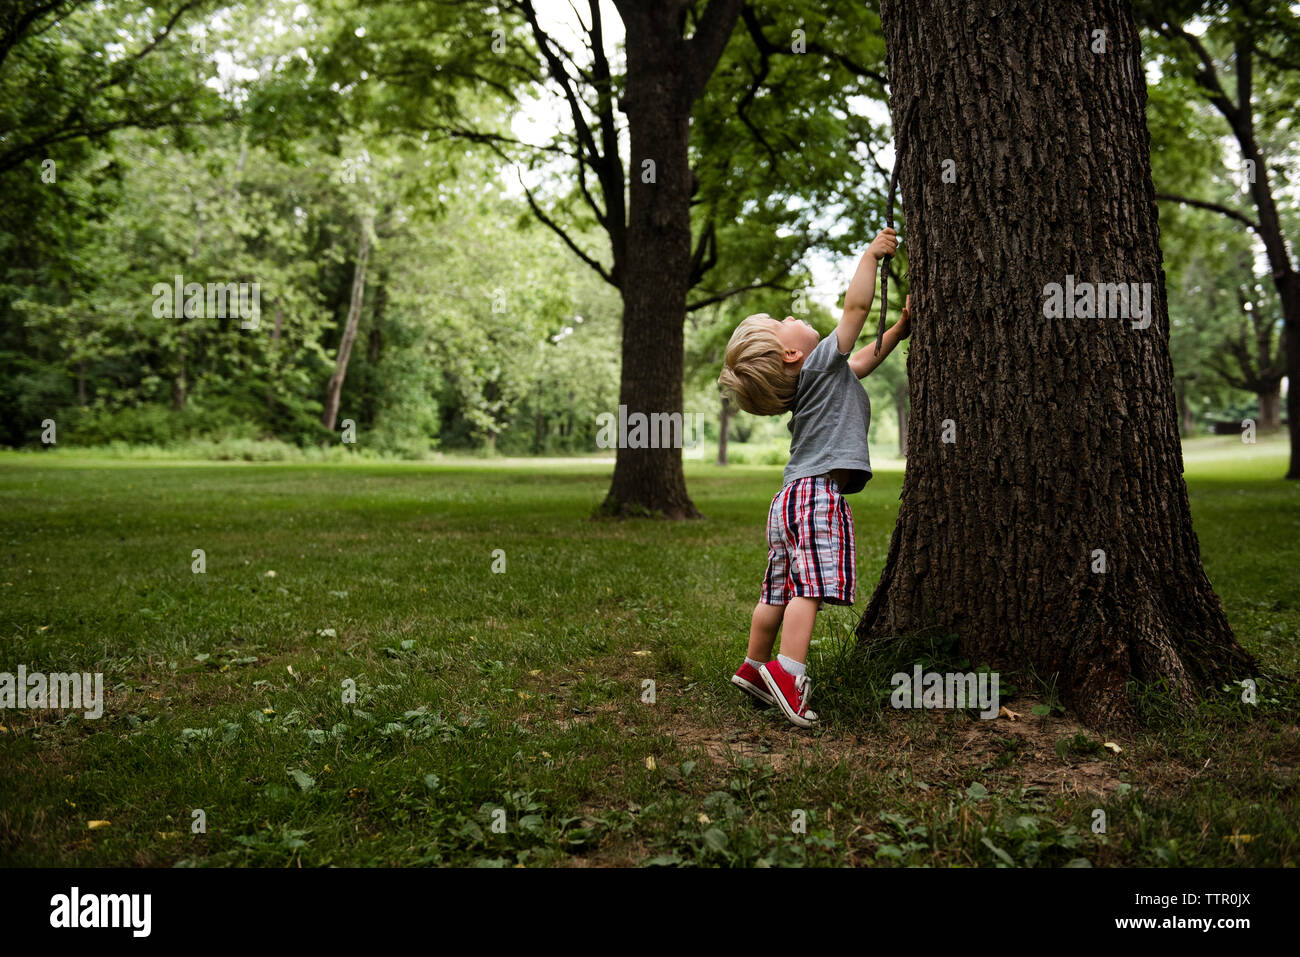 Boy with stick standing on tiptoe by tree trunk Stock Photo